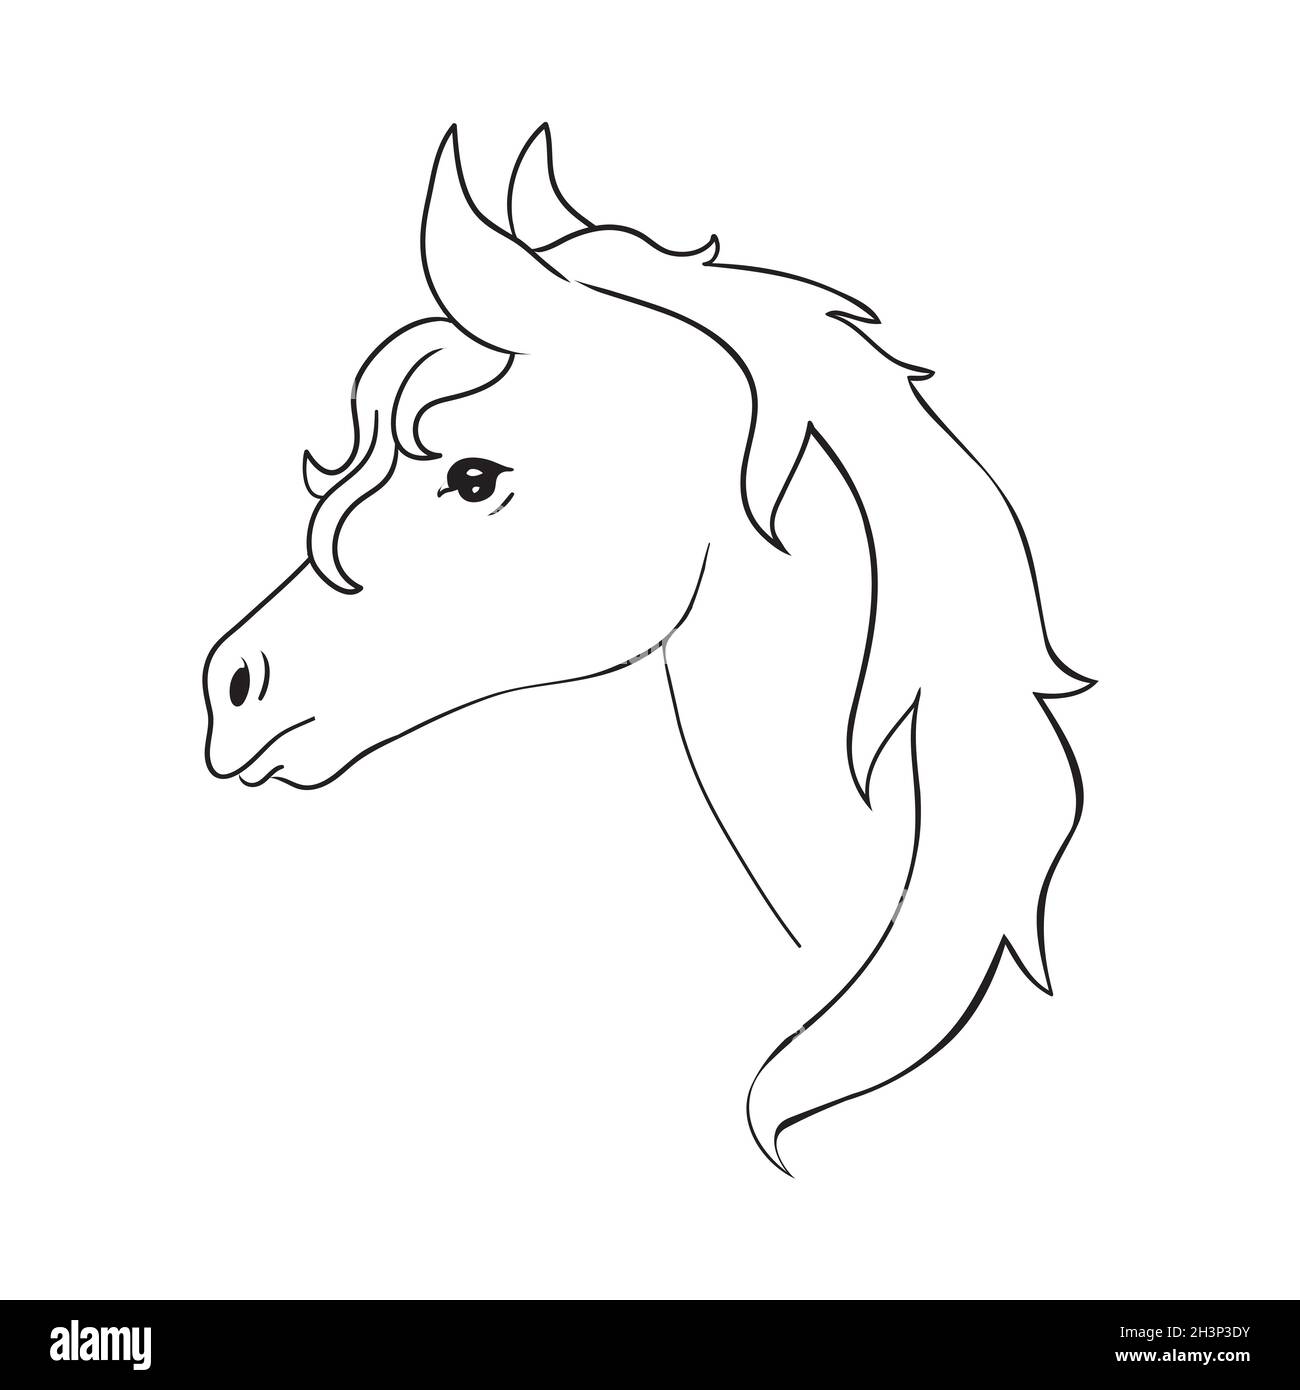 How to Draw a Horse Head - Step-by-Step Tutorial